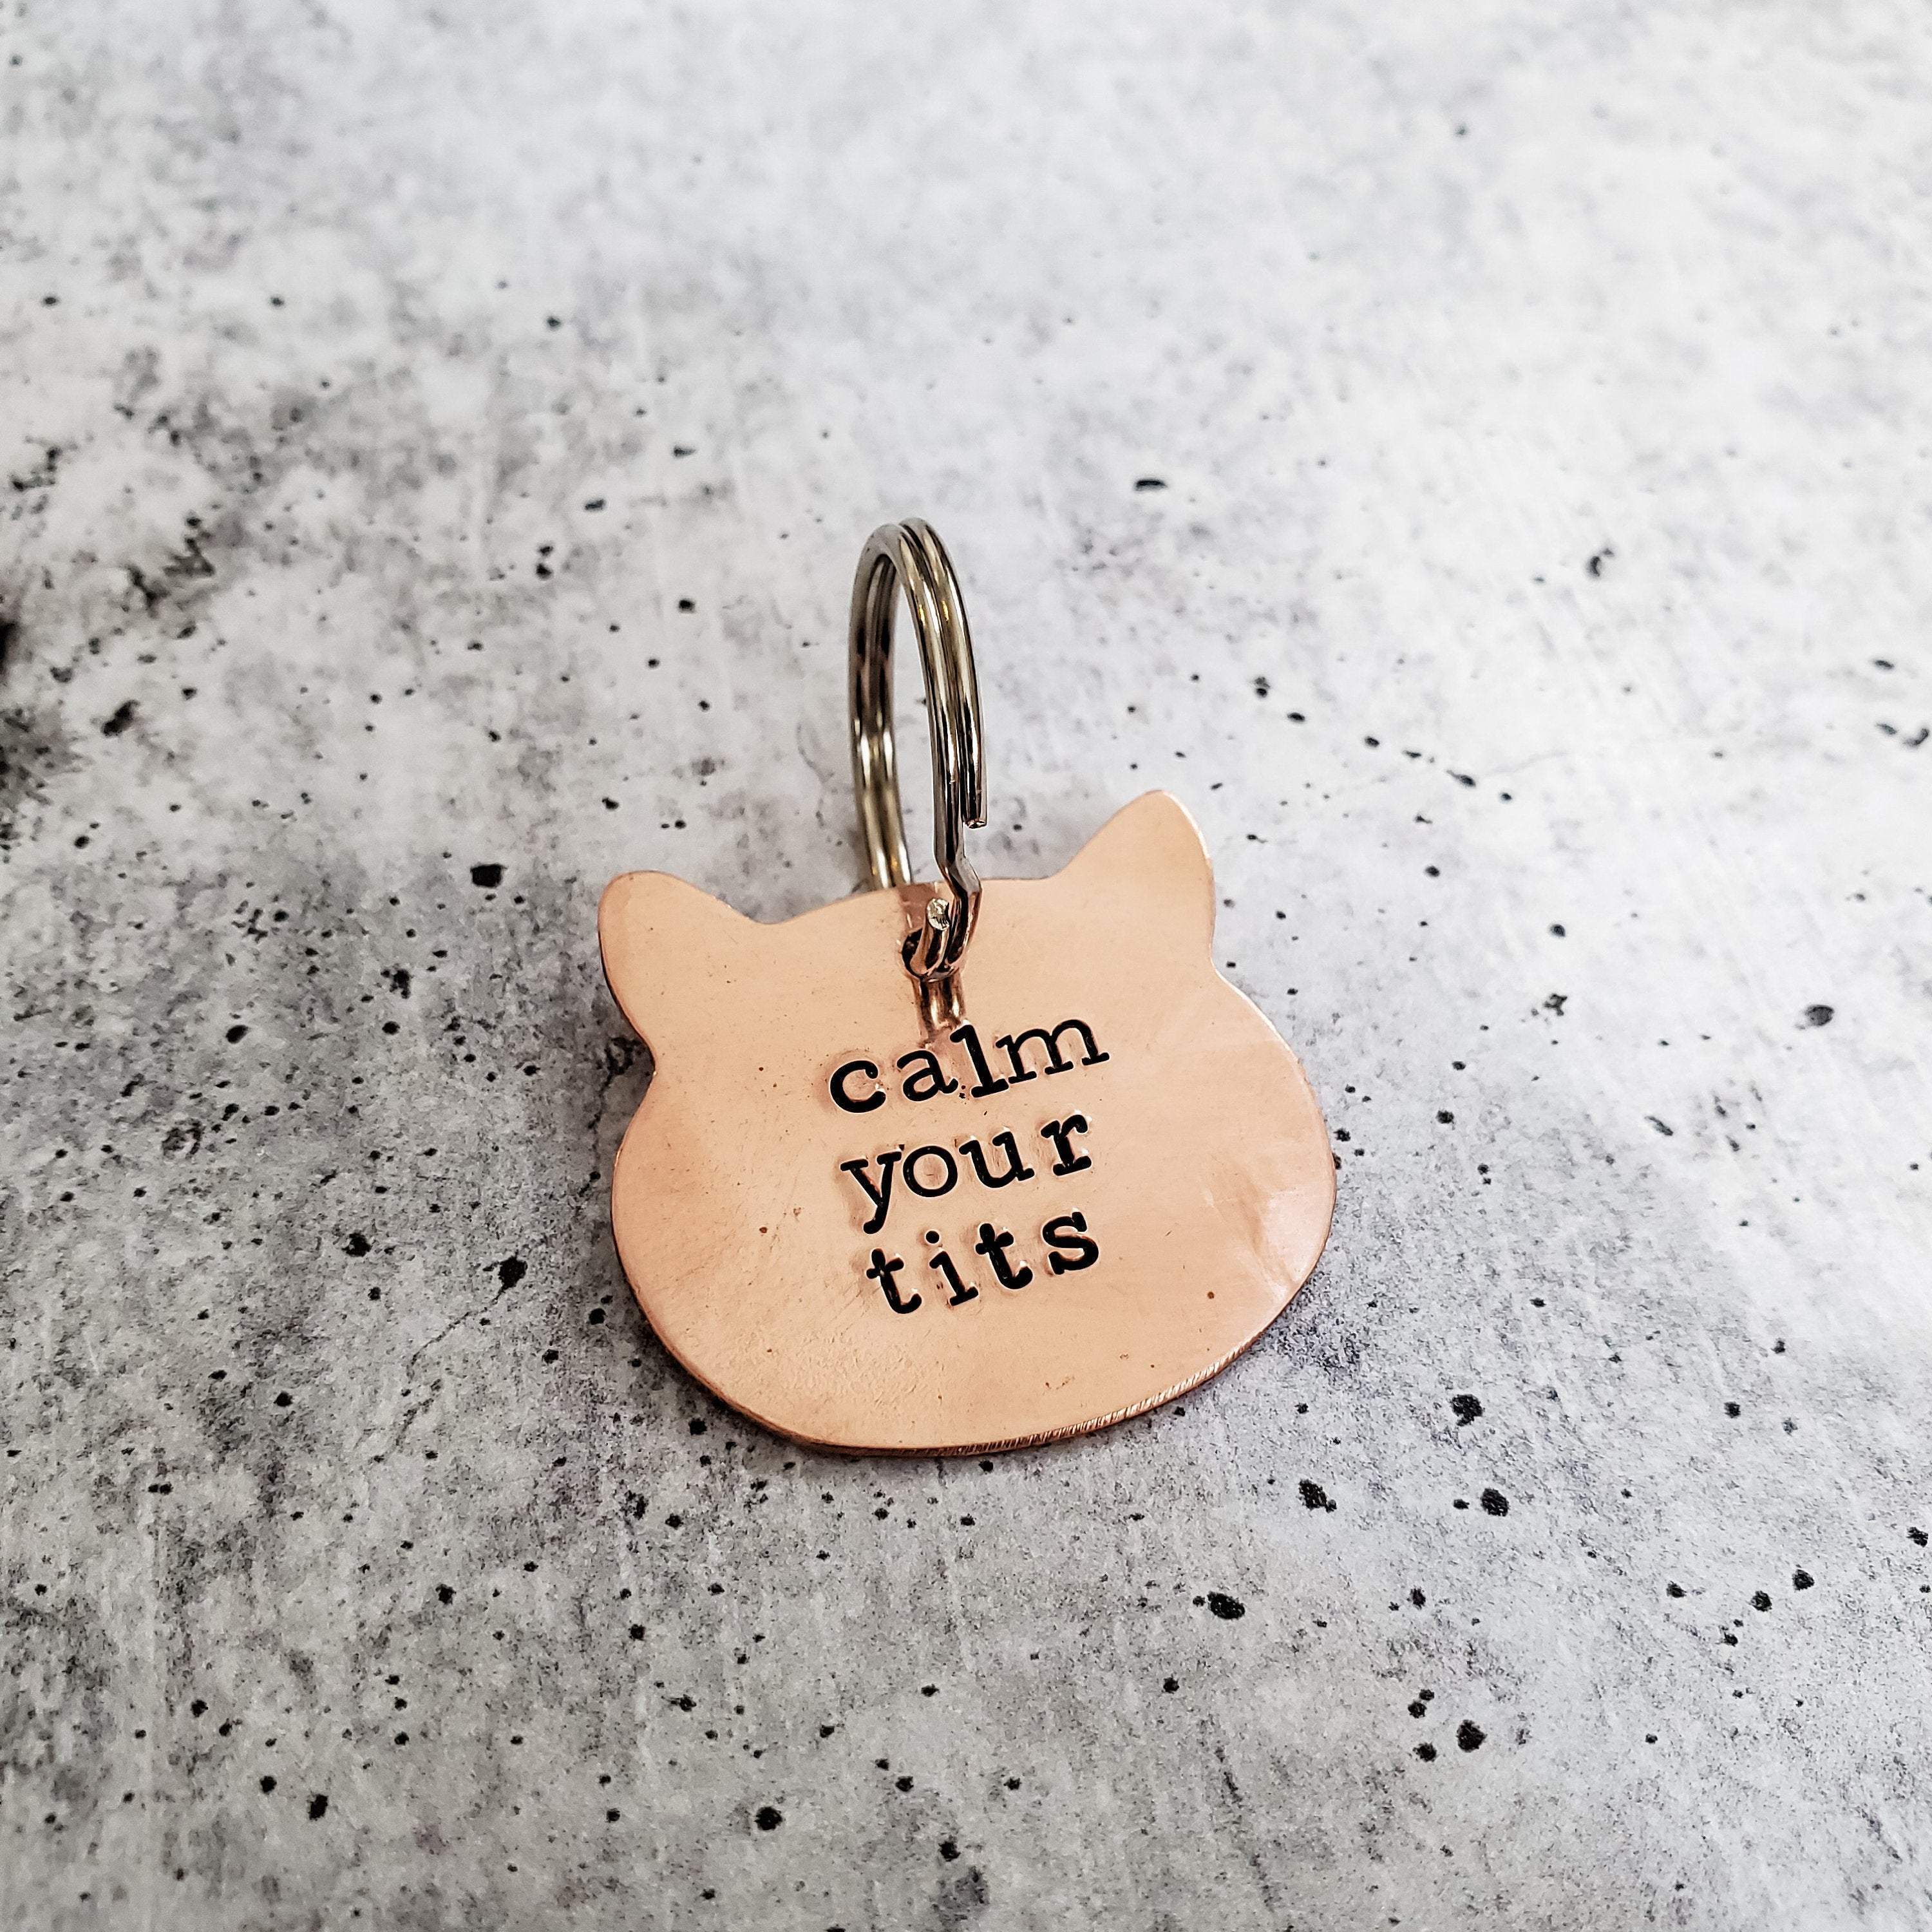 CALM YOUR TITS Copper Cat Keychain Salt and Sparkle